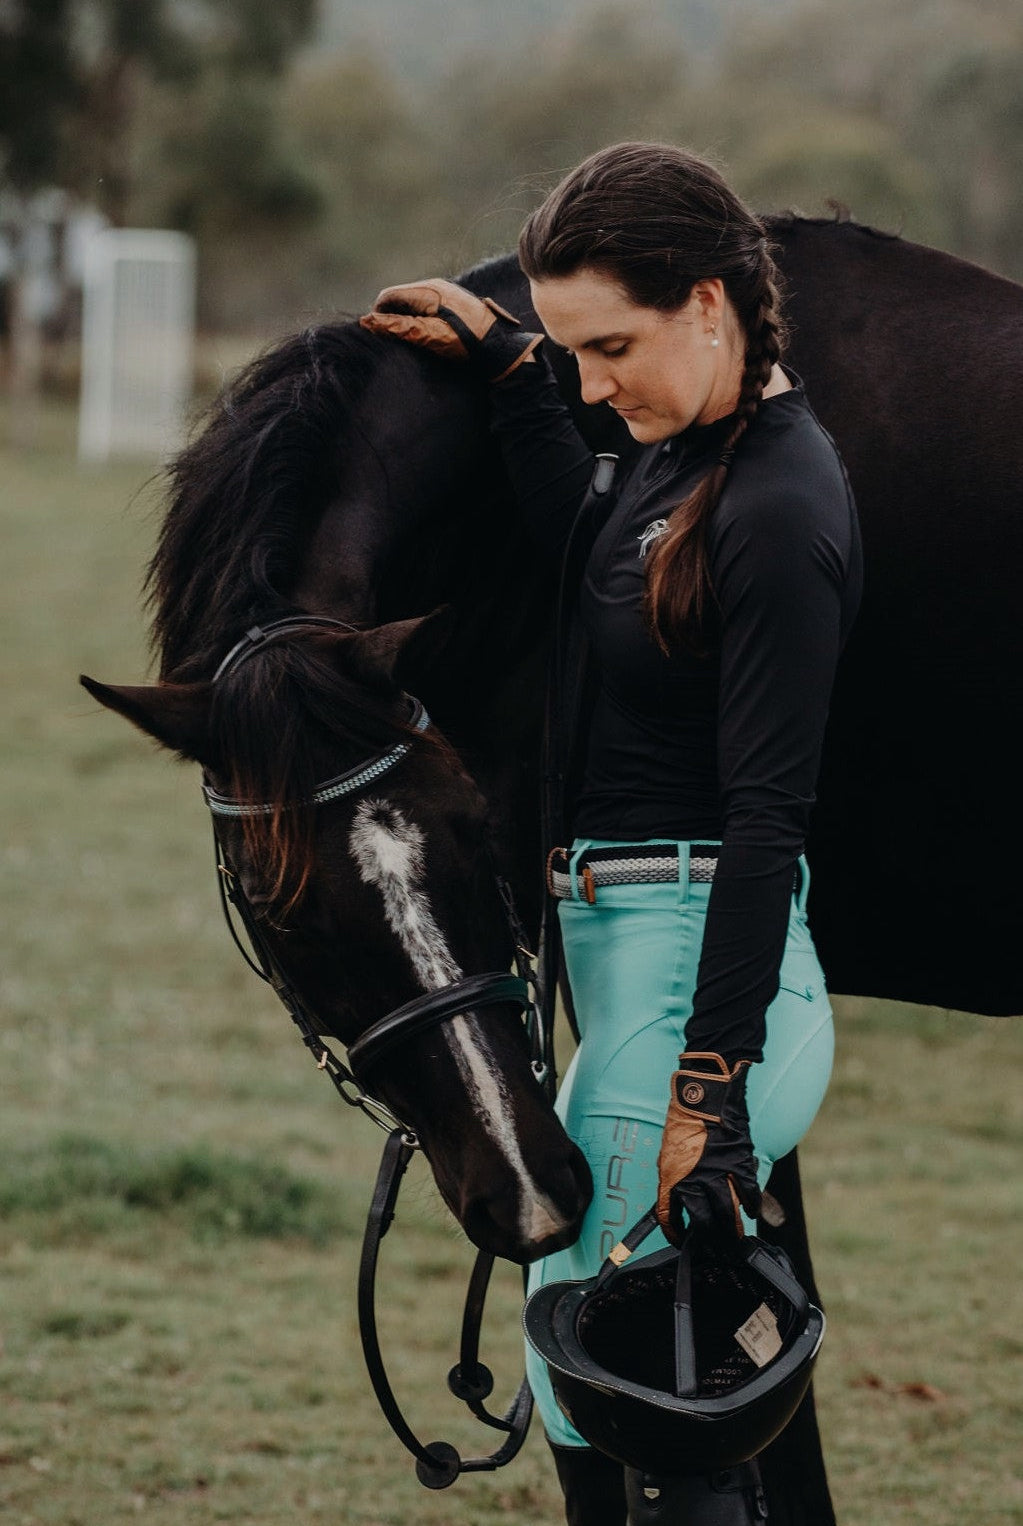 A woman wearing equestrian gear, including a black shirt and Pure Canter Fusion Tights - Aqua with silicone grip features, gently touches and stands next to a black horse with a white blaze on its face. She holds a riding helmet in her other hand, and they are outdoors in a grassy area.